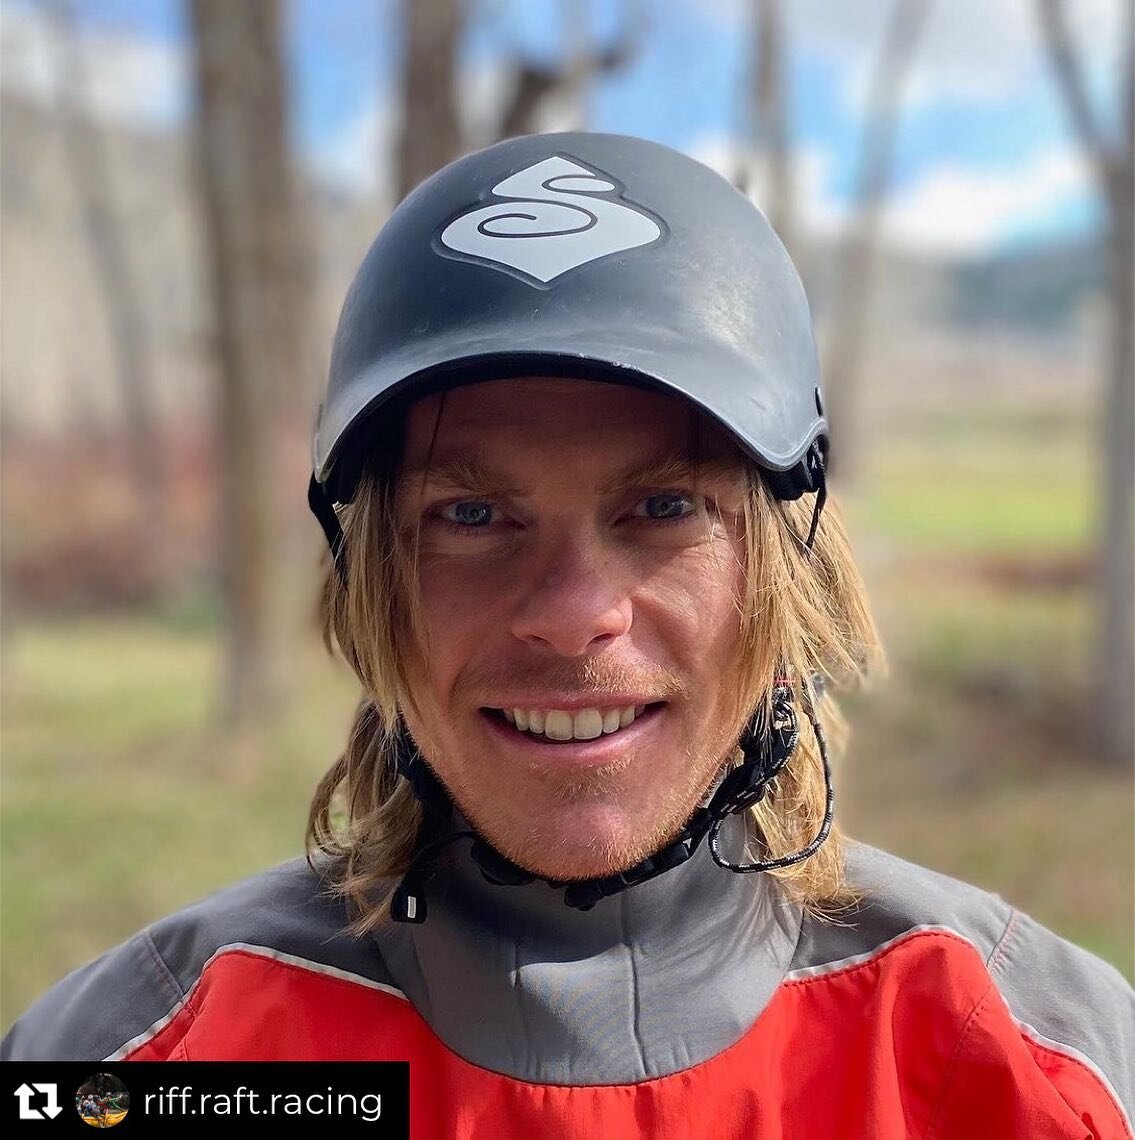 Very excited to announce a couple week break from ski training/racing coming up to join @riff.raft.racing in Nepal for the @thegreatkarnaliquest!!
~~~~~~~~~~~~~~~~~~~~~~~~~~~~~~~~~~~~~~

Meet Scott! Our safety kayaker for Nepal!

Scott Lacy was born 